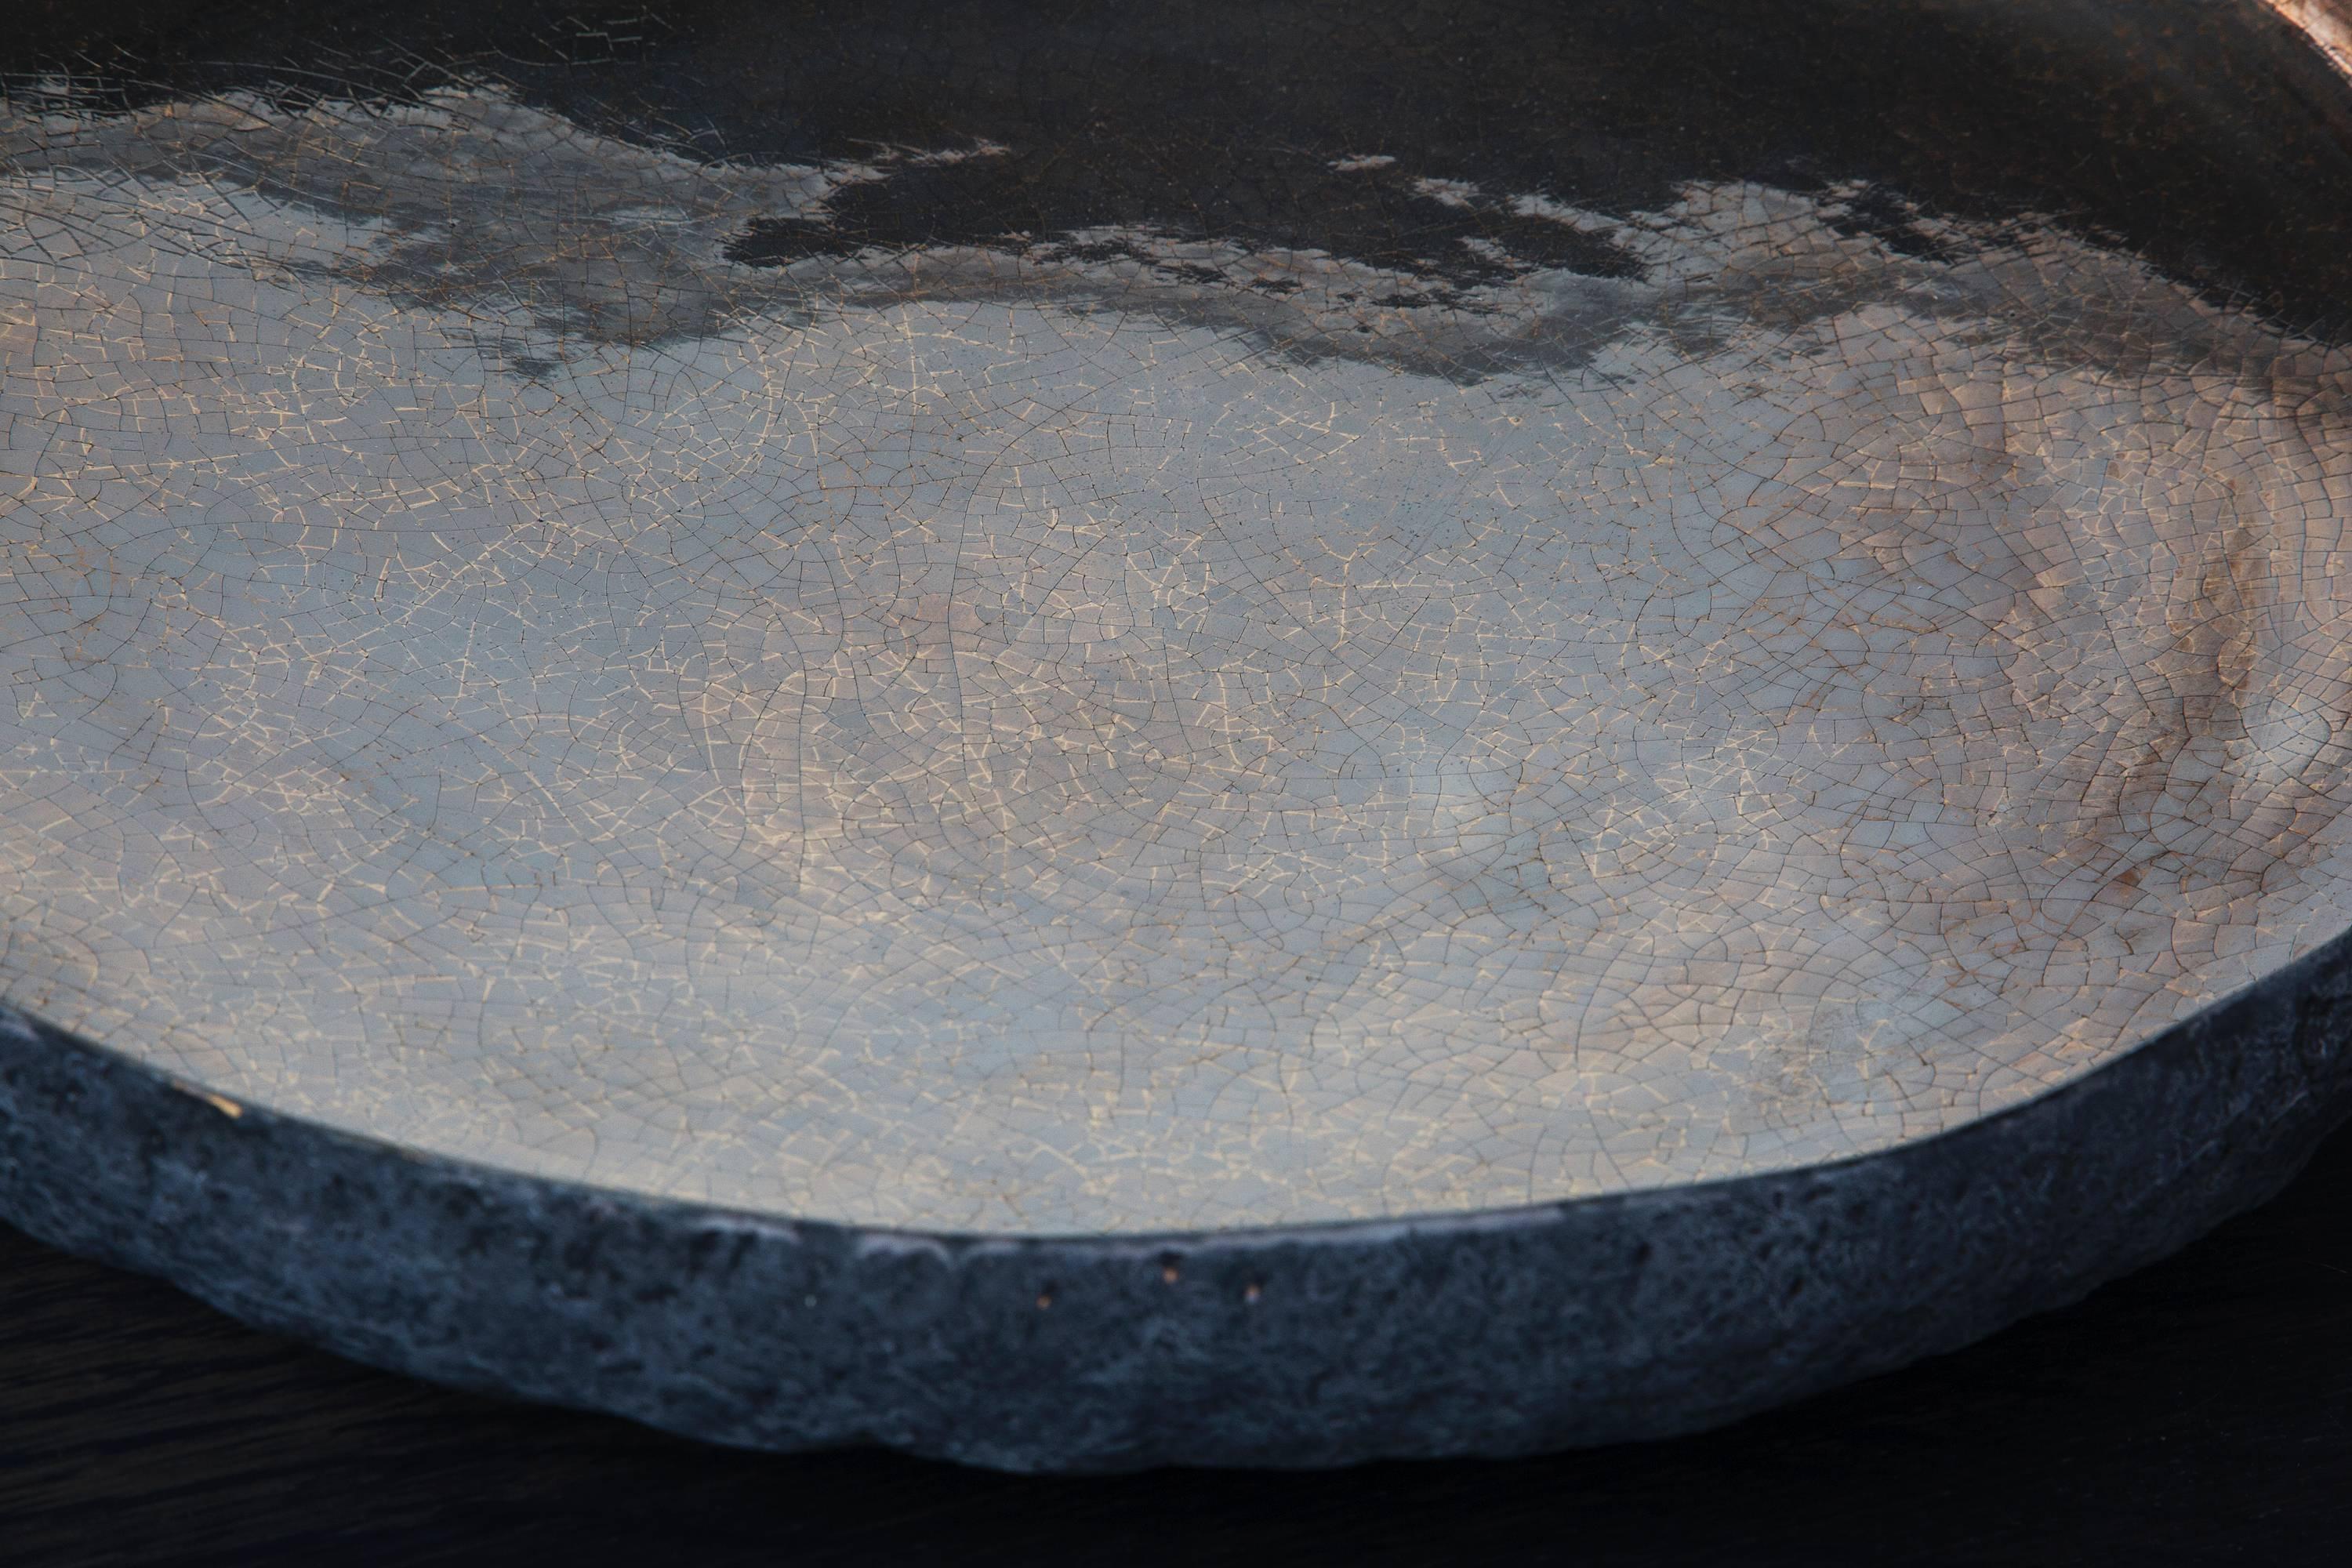 A shallow ceramic bowl with a beautiful lush mix of gold and platinum interior and a volcanic textured exterior.

Beginning with a ball of clay, Salusti pinches it into vessels and textures them with stone fragments. After multiple firing it was